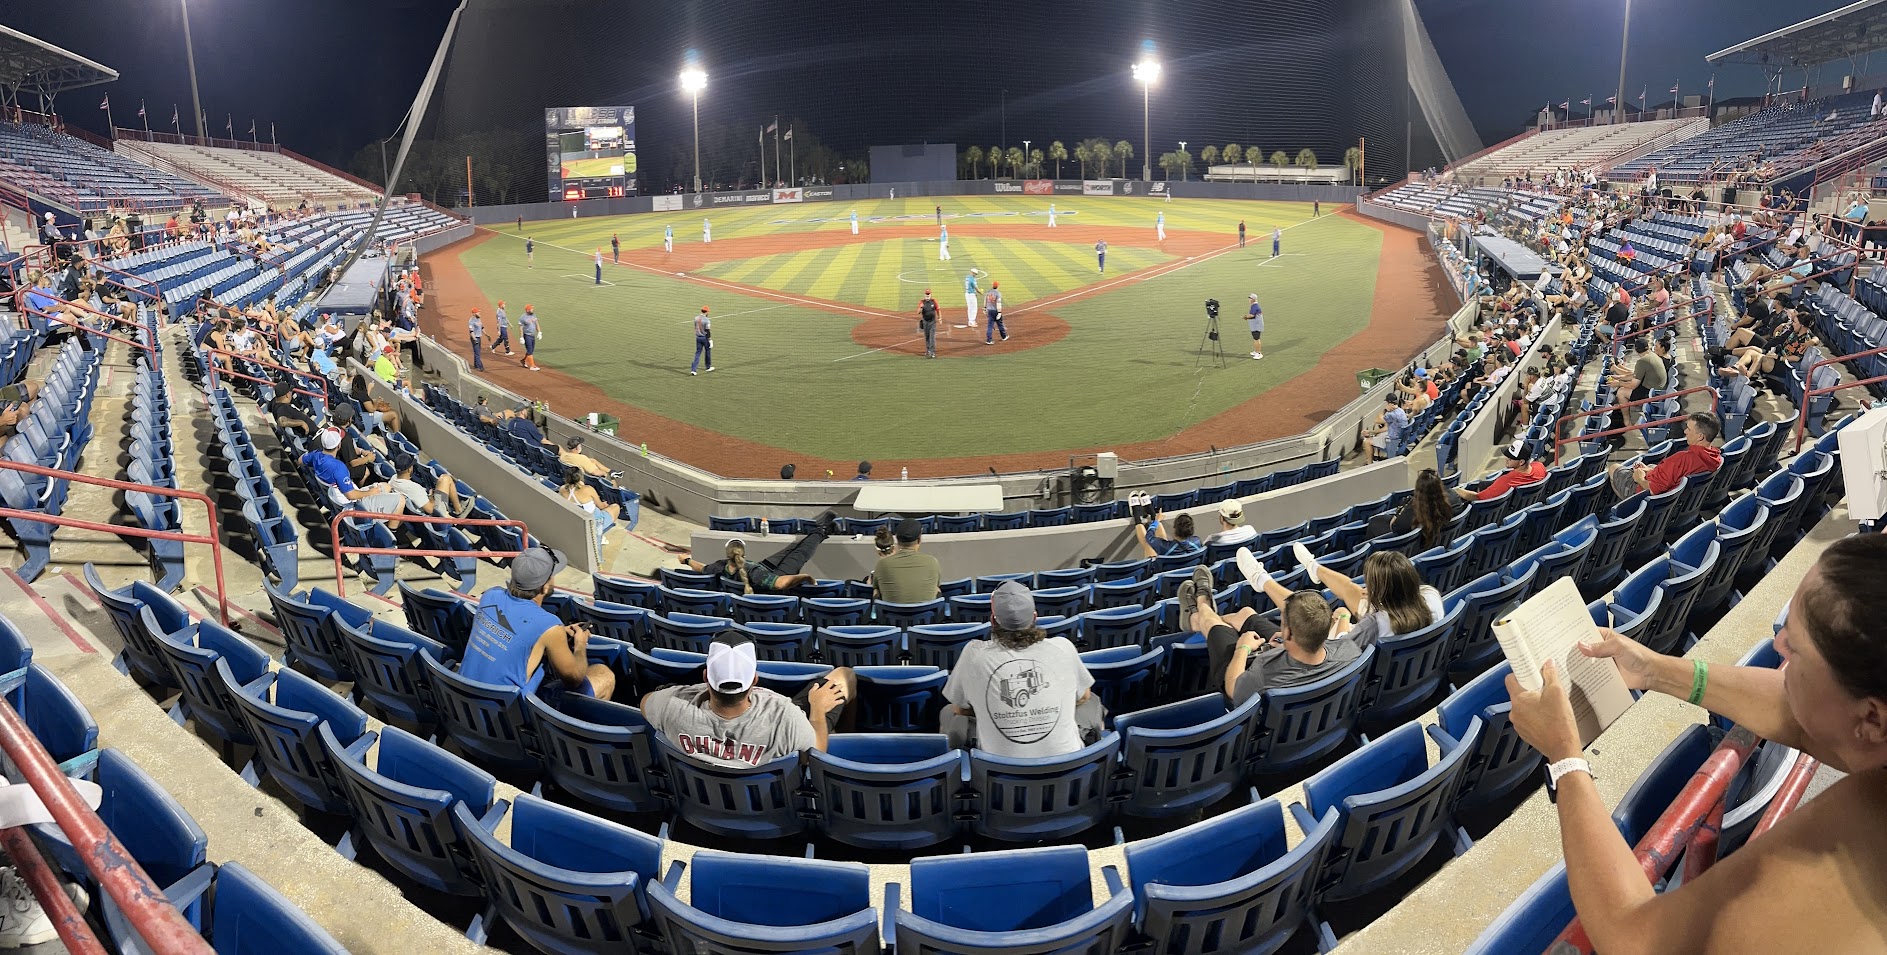 2023 Worlds Results, Report Links, and Video Links! – Conference USSSA